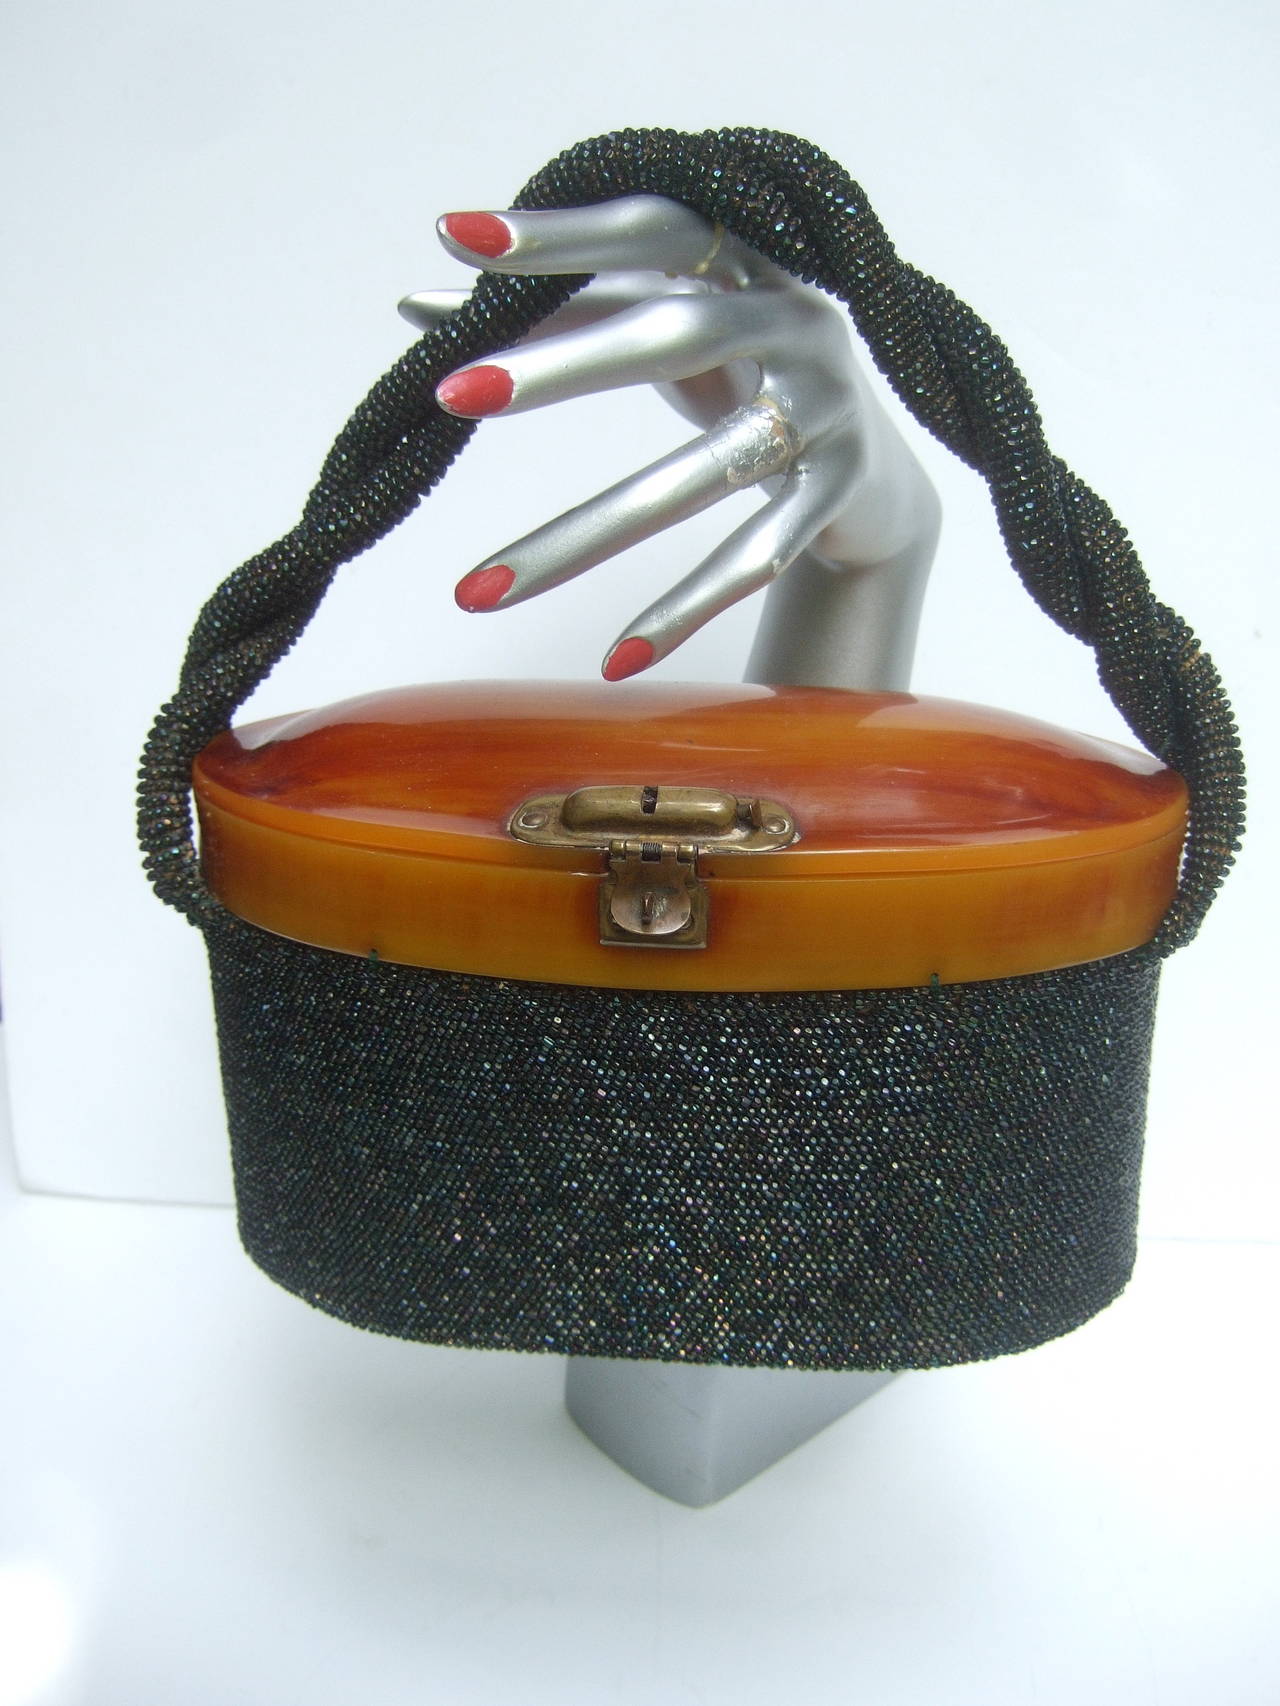 1940s Art Deco jet glass beaded handbag 
The oval shaped carnival beaded is adorned
with an amber lucite lid cover. The elegant 
retro handbag is designed with a brass metal
latch clasp mechanism 

The black glass micro beading circles the